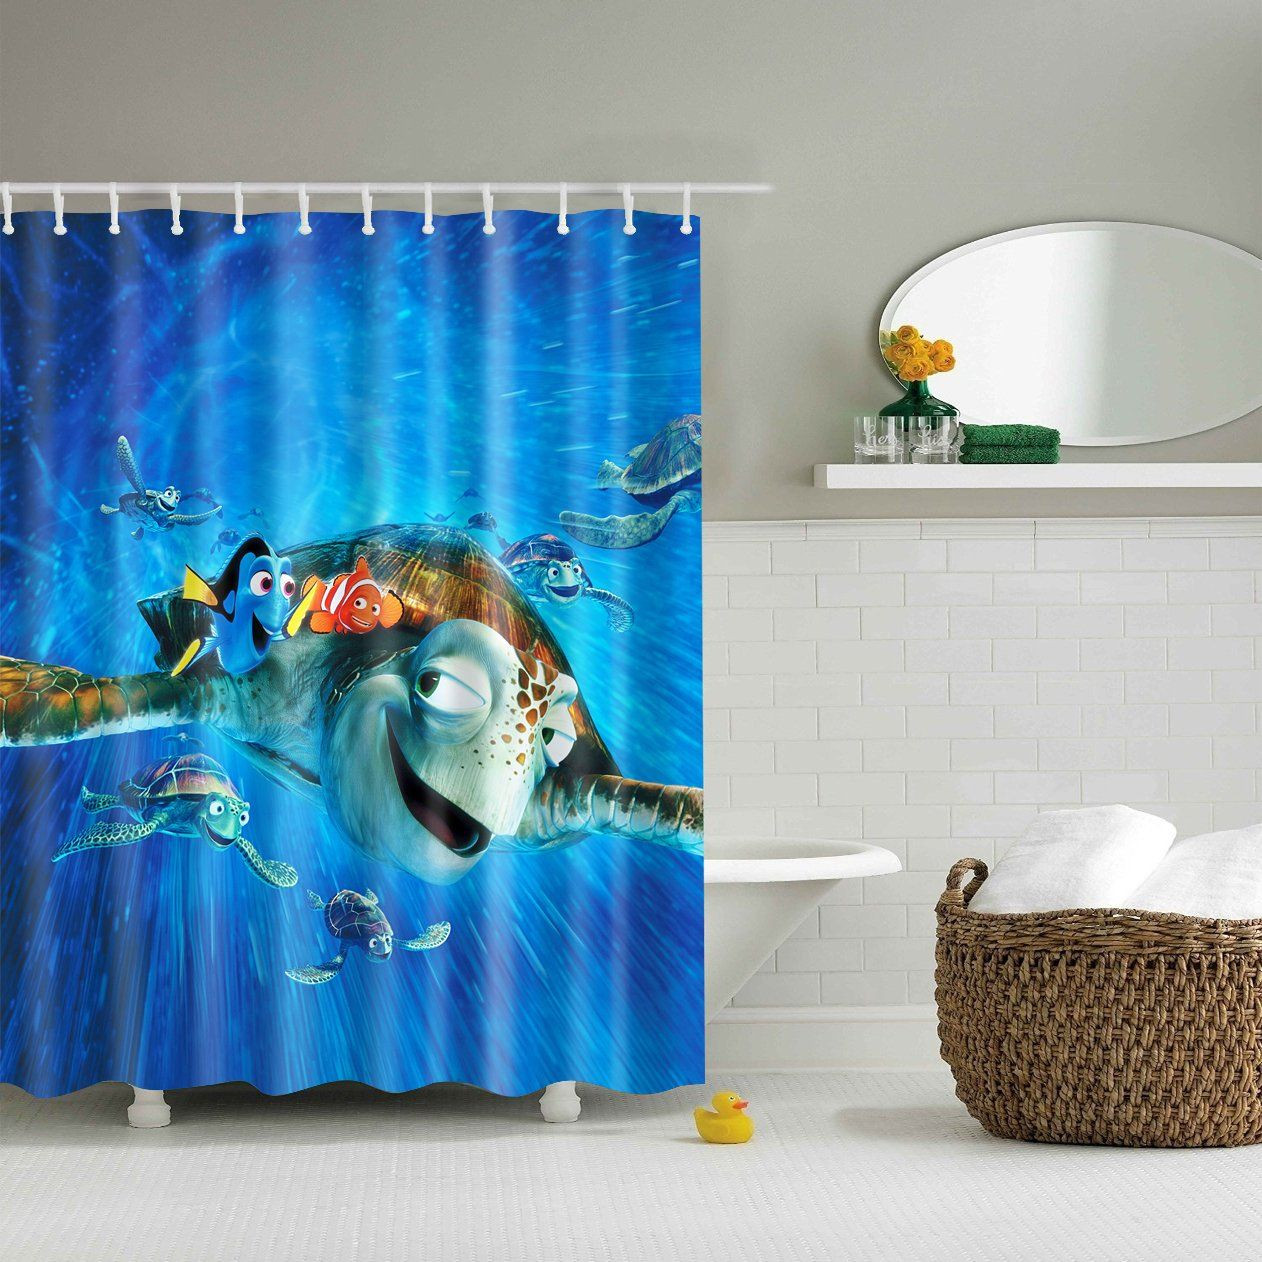 Finding Dory Bathroom Decor
 Finding Dory Nemo DVD Cover Shower Curtain in 2020